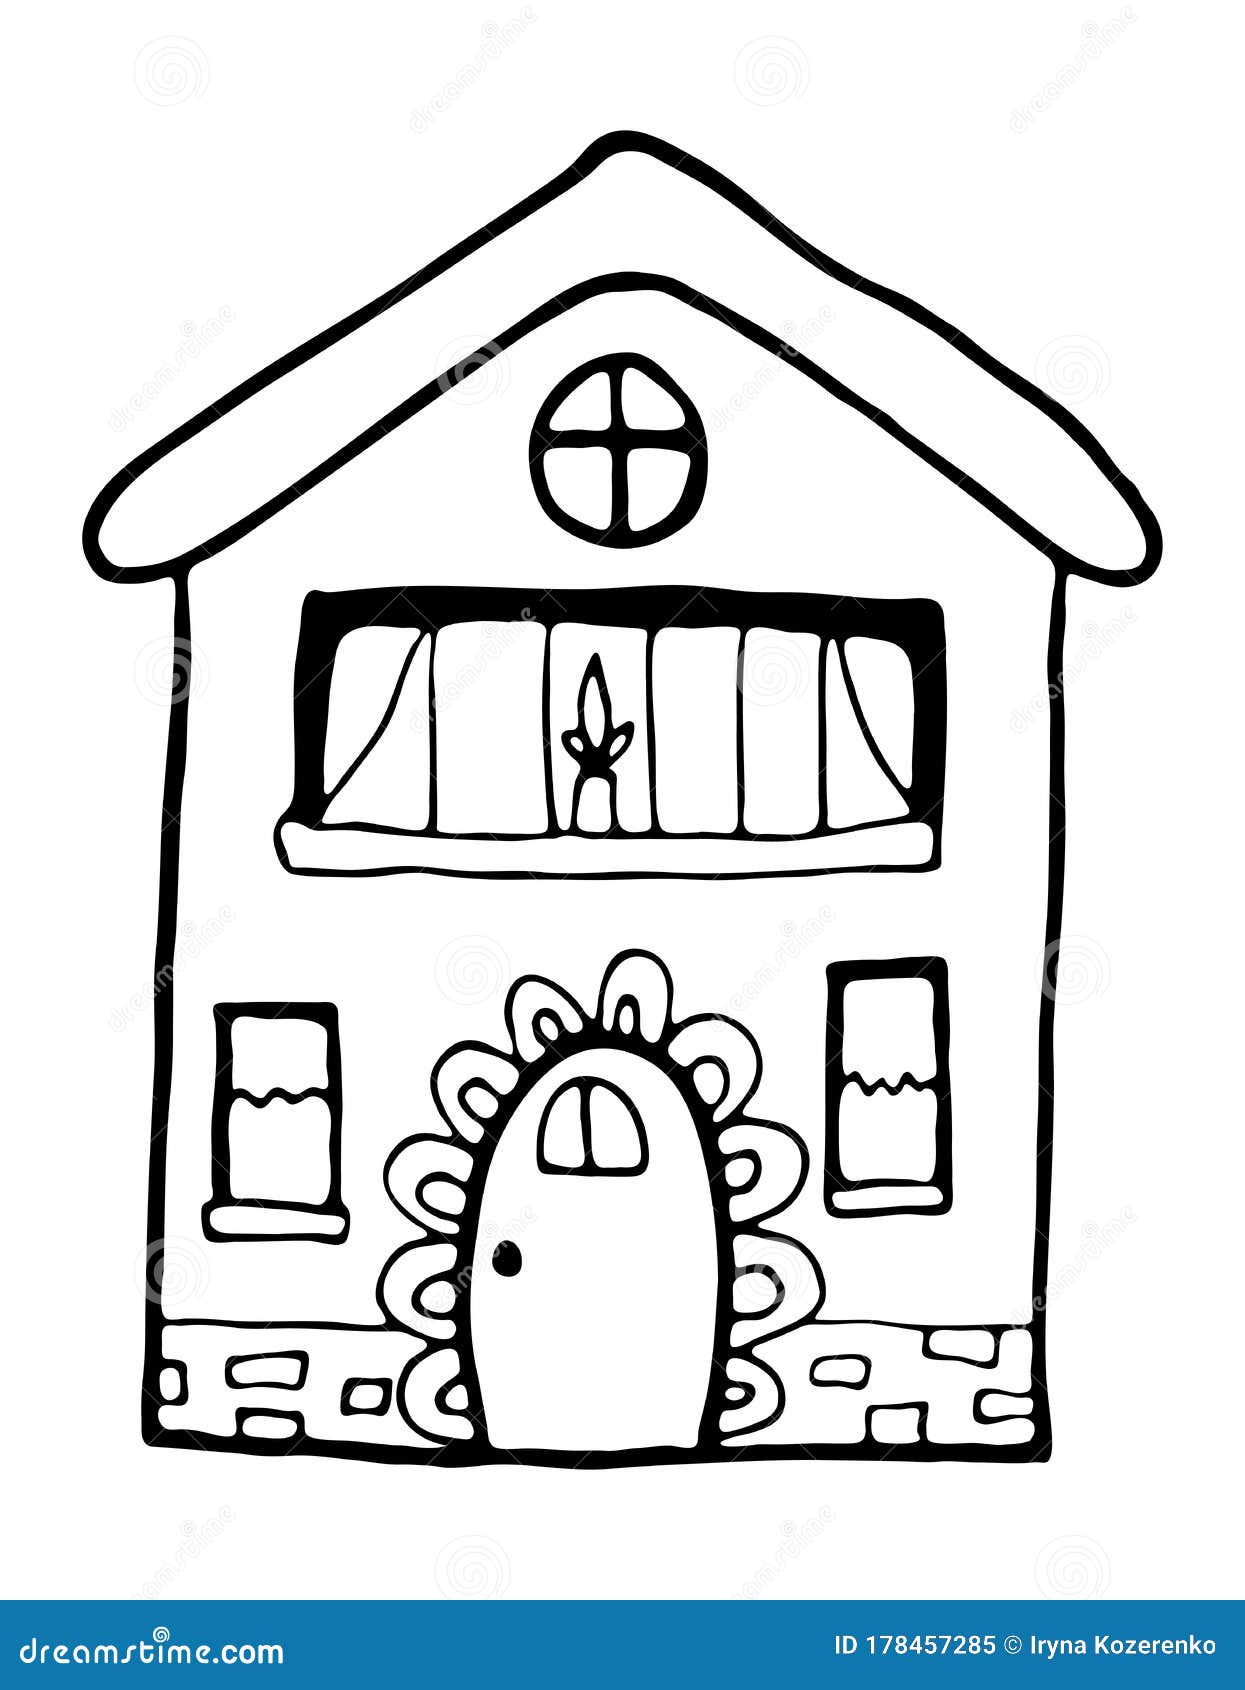 Hand Drawn Doodles Cartoon House with Cute Door Decor. Black and White  Bulding Line Art Vector Illustration Stock Vector - Illustration of icon,  isolated: 178457285